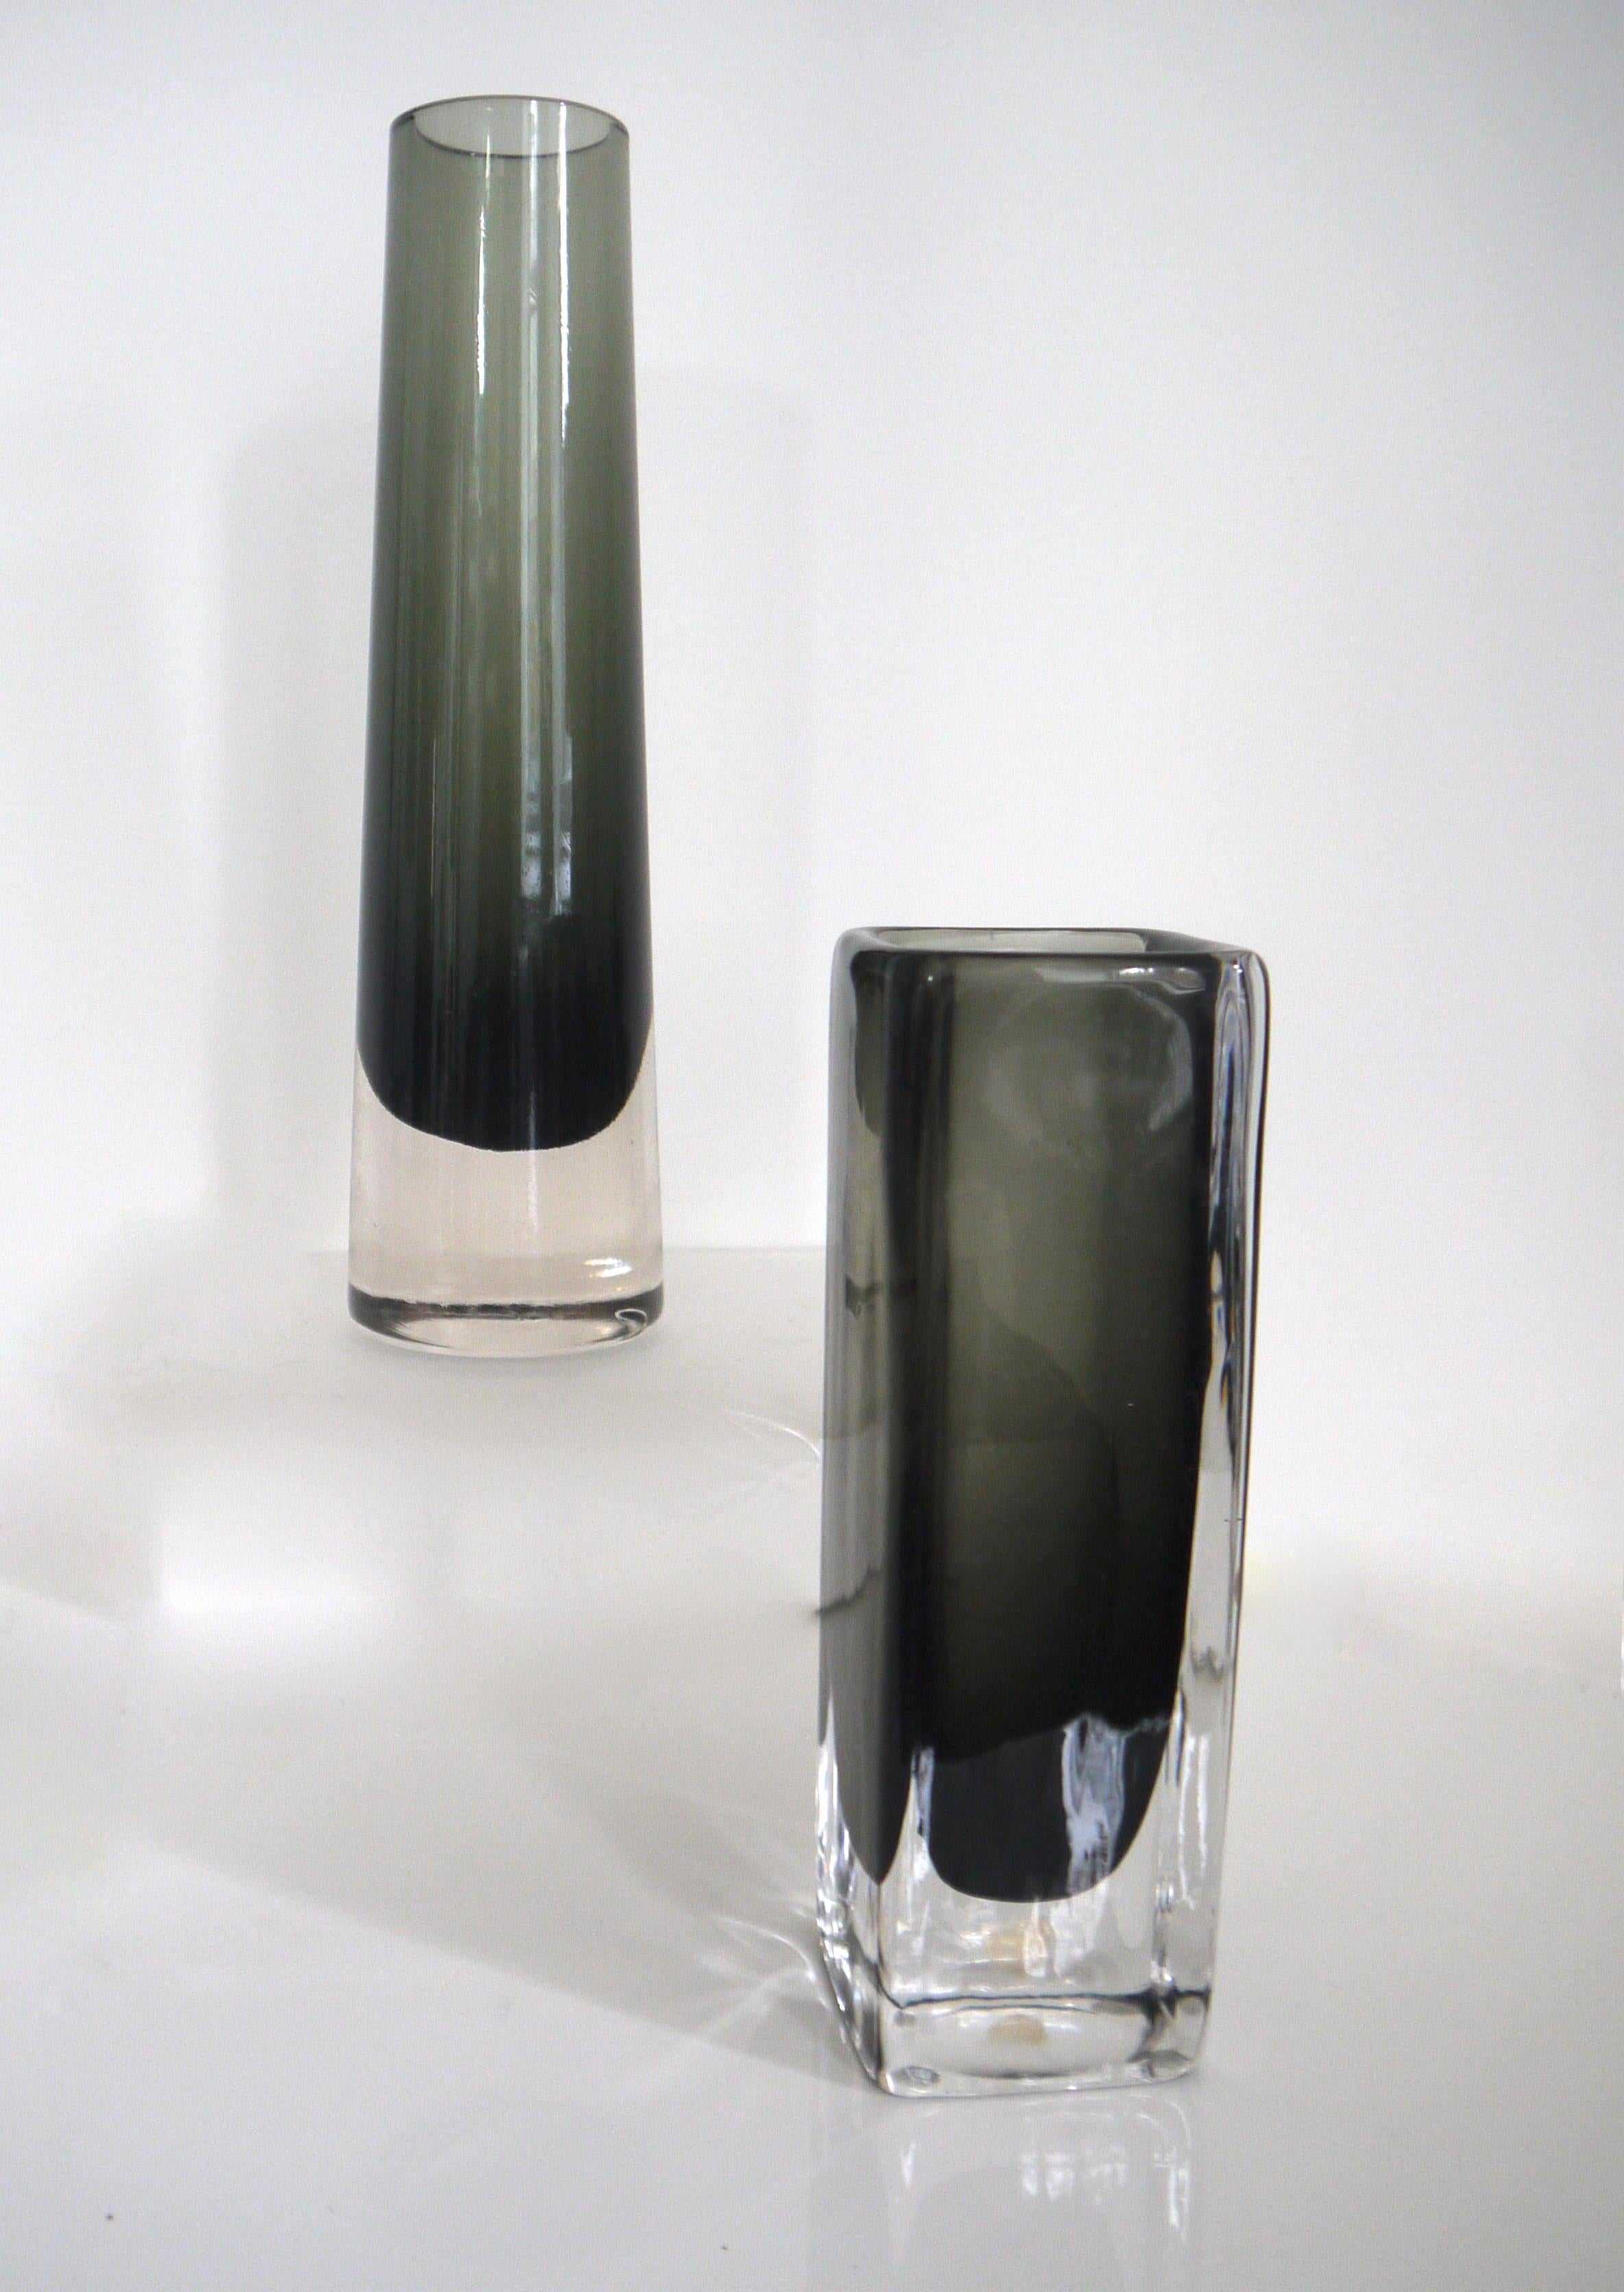 Scandinavian Modernist vases Elme Glasbruk and Nils Landberg for Orrefors, 1958
Two-piece set. 

The 'bubble glass' is a black smoke from Elme Glasbruk 
Height 24 cms, diameter at base 7 cms and at mouth 4 cms

The slab vase is by Nils